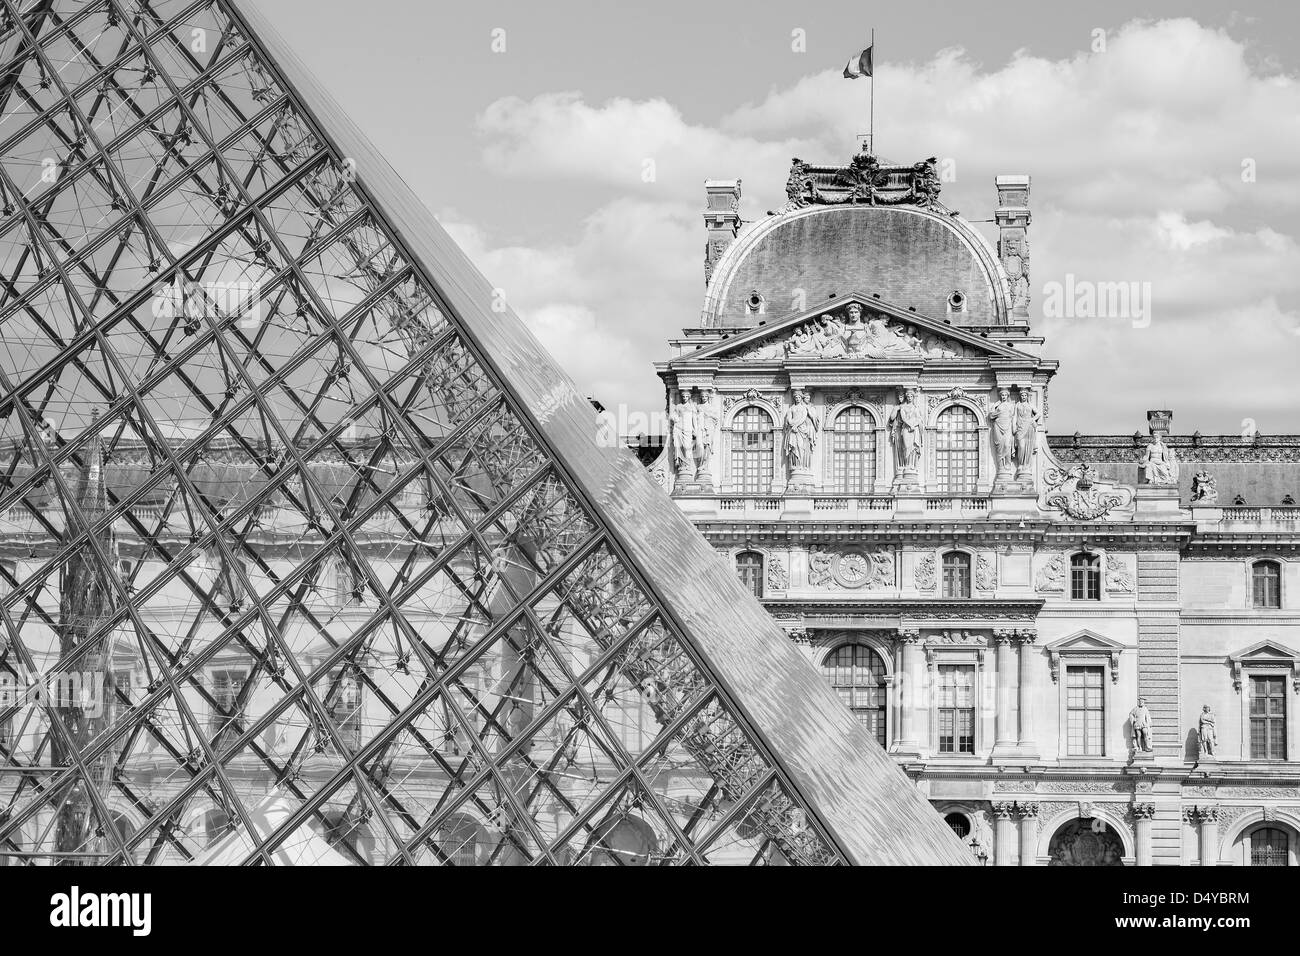 La Louvre in Paris shot in black and white with the glass pyramid cutting across the traditional bullding Stock Photo